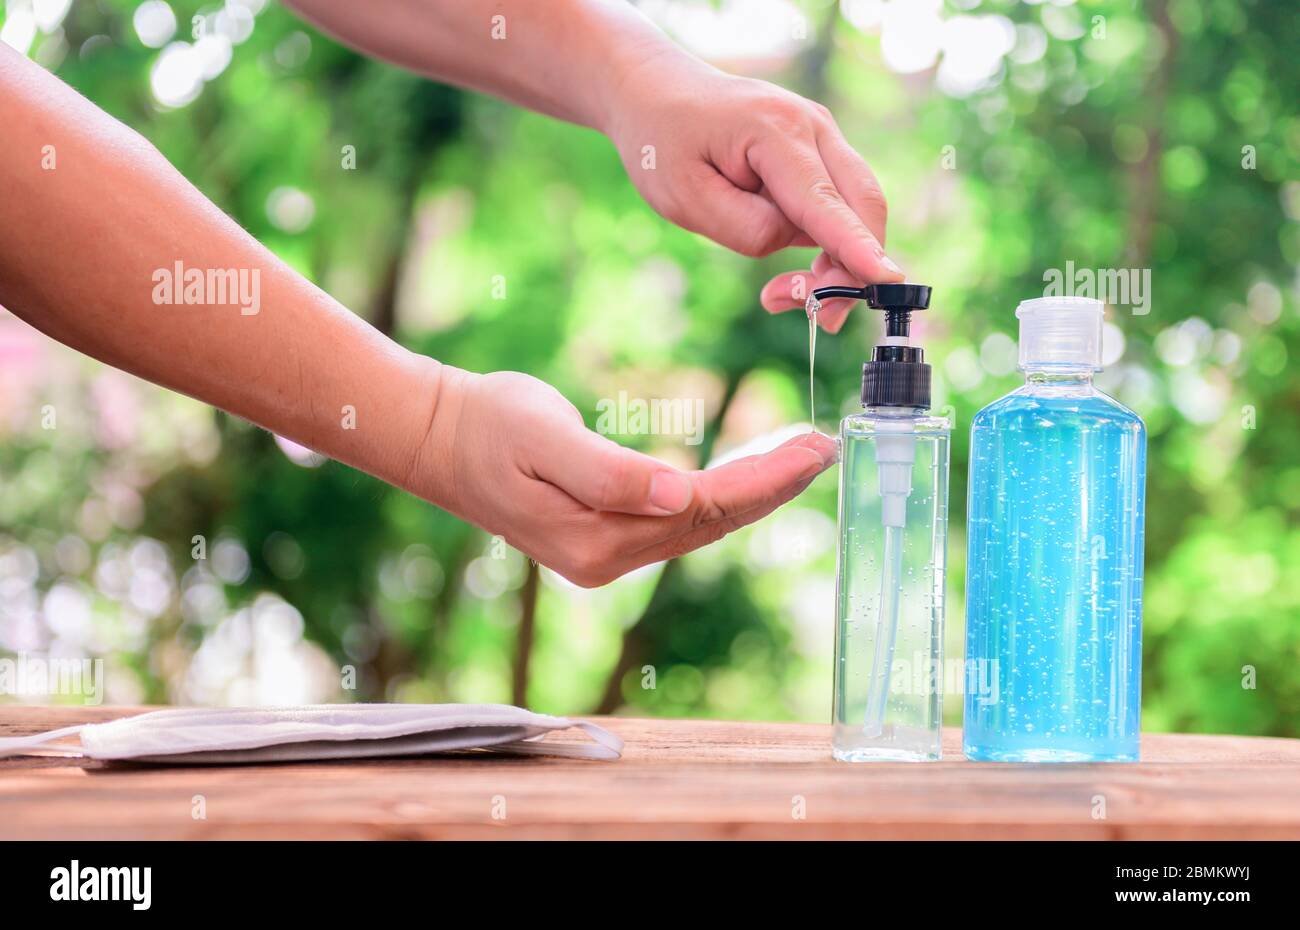 Antiseptic hand gel with alcohol. Washing hands to protect against Corona virus and stop the spread of COVID-19. Stock Photo